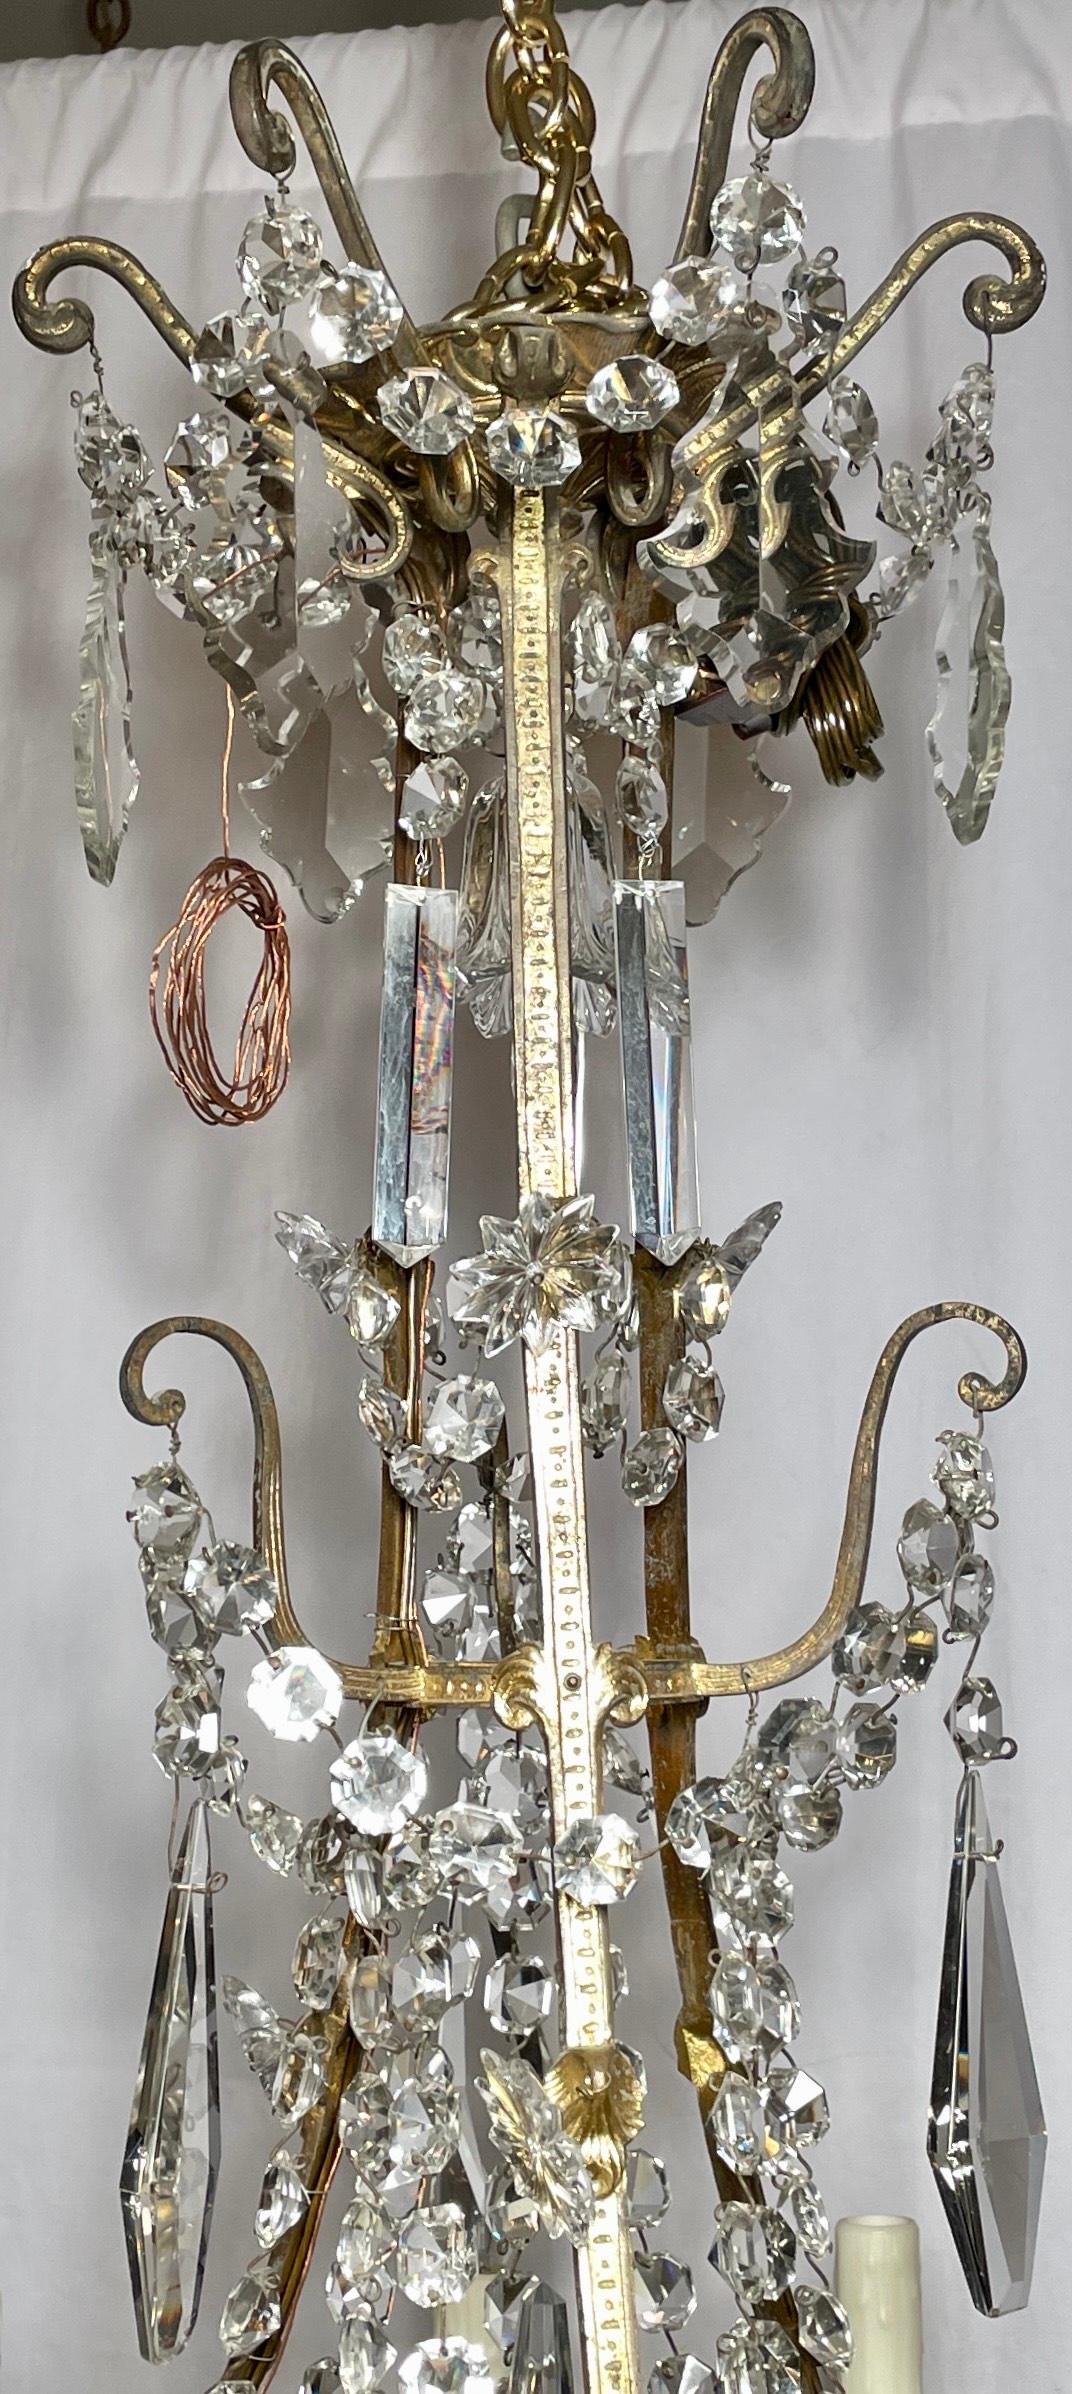 Antique French Napoleon III crystal and gold bronze 12-light chandelier, circa 1890's.